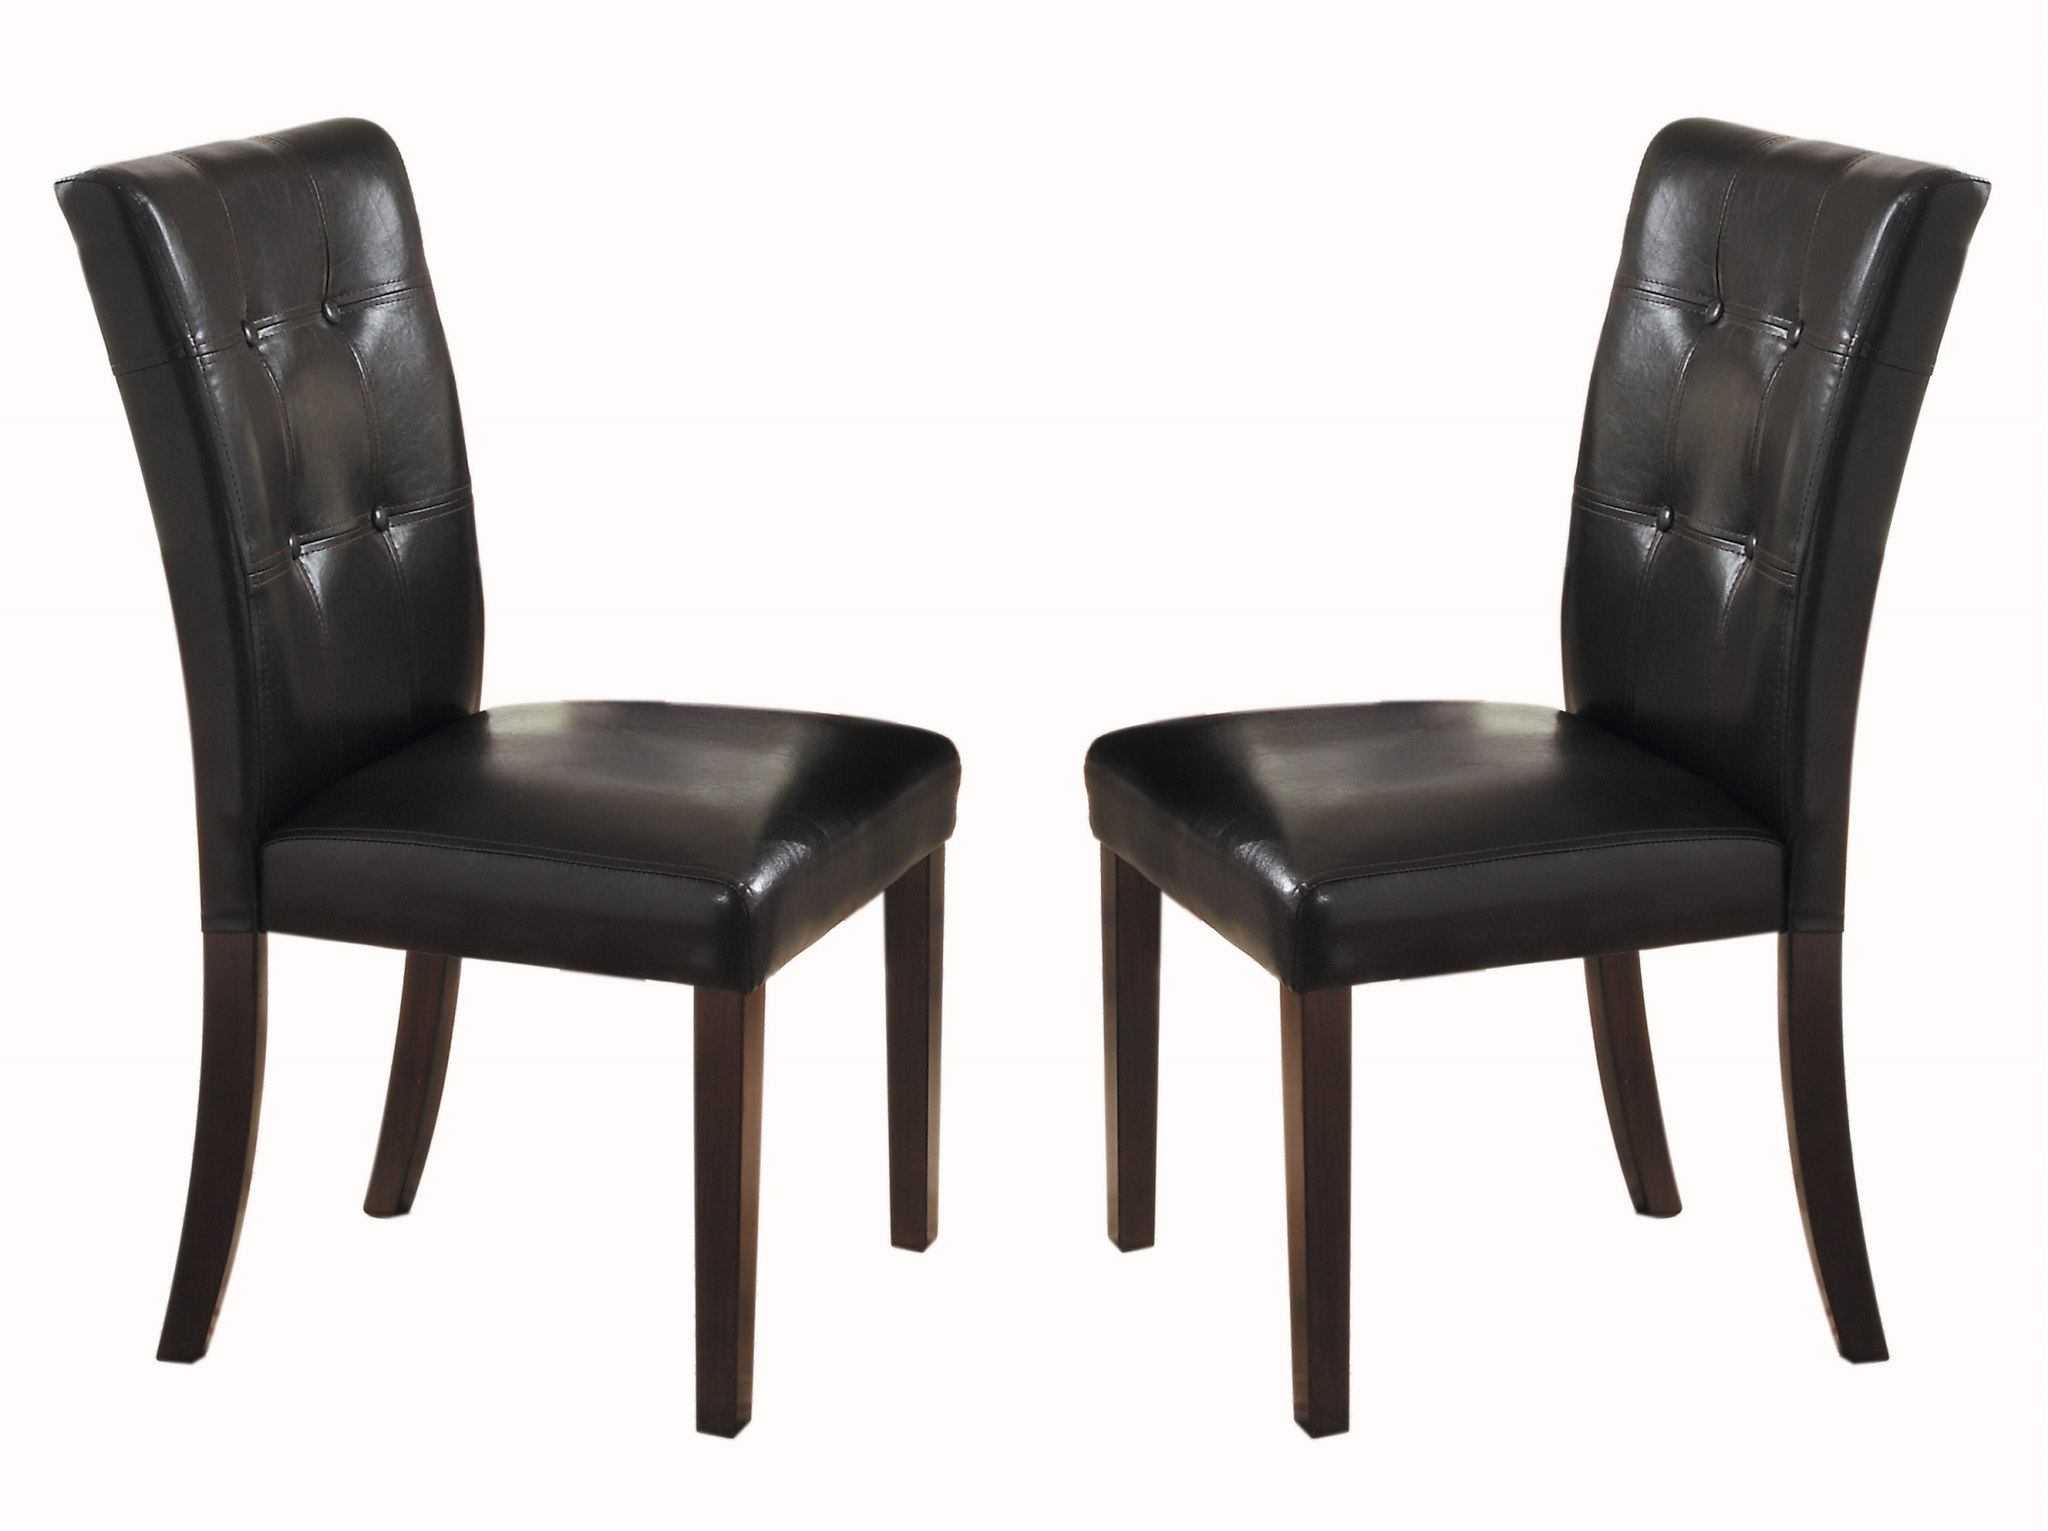 Button Tufted Side Chairs Set of 2pc Wood Frame